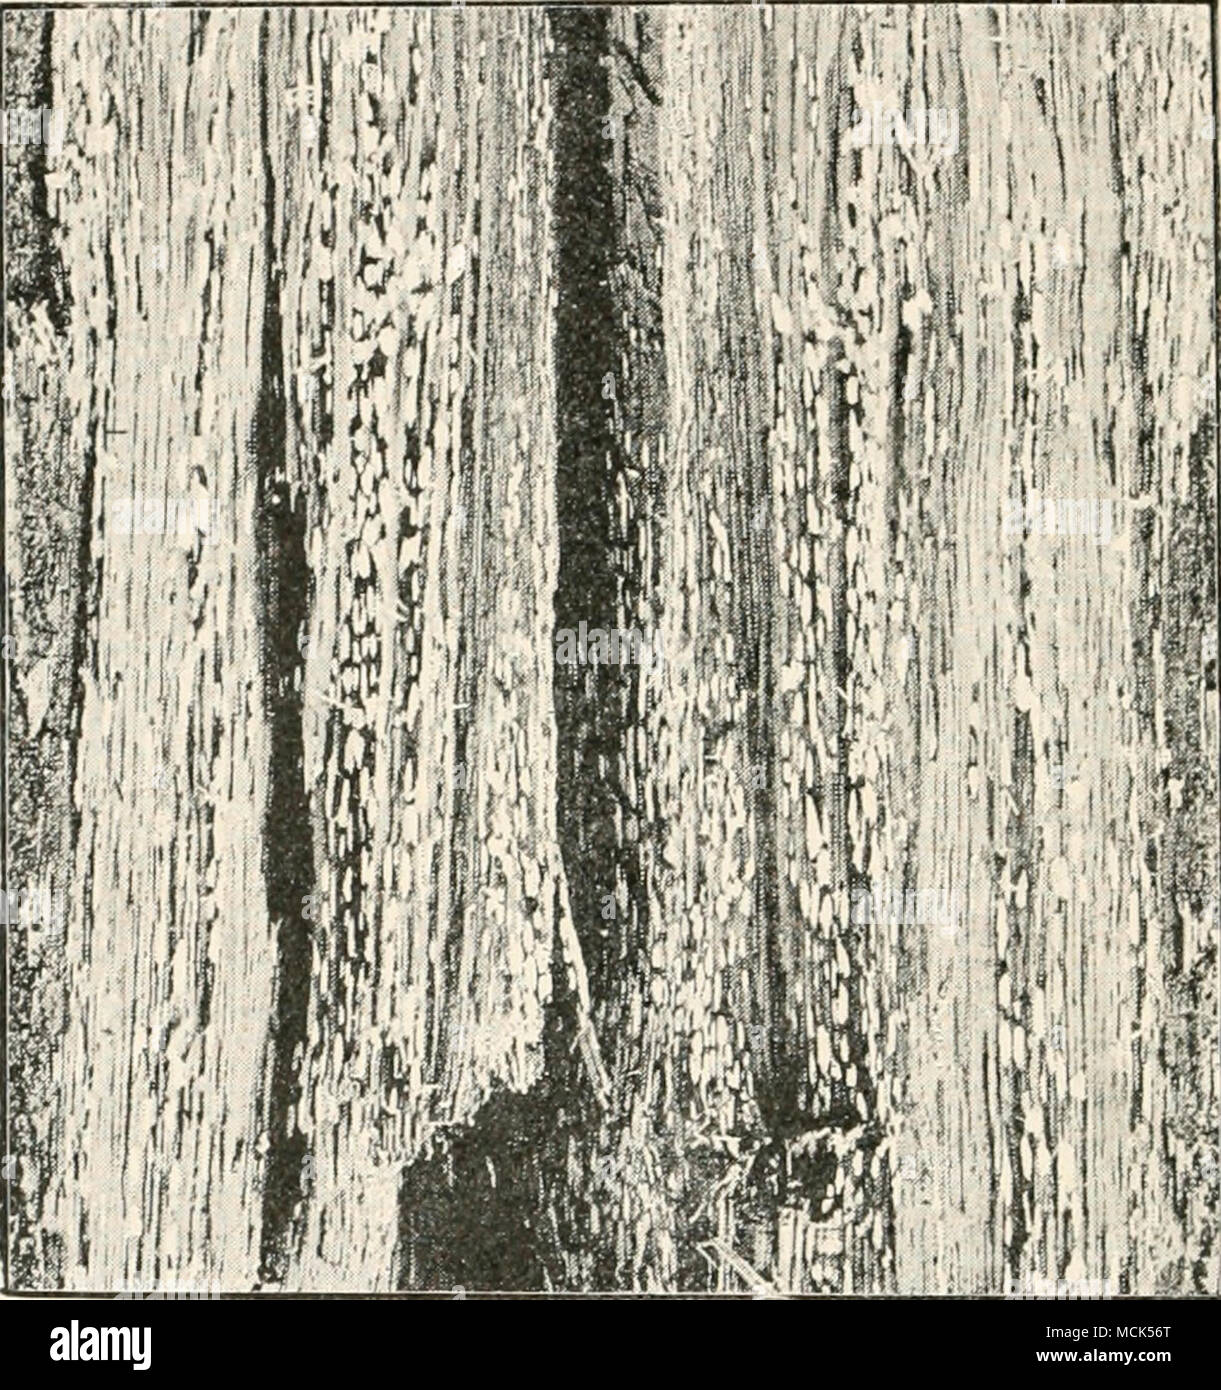 . rm ''' Fio. 2()0.—titrreuiii jn'stulosum. iJestiniction of Oak-wood. l.ongitudinal section showing the brown wood with isolated hollow spots containing white mycelium, (v. Tubeuf phot.) Stereum frustulosum Fries. (Thelephora perdix Hartig).'^ (Britain and U.S. America.) The sporophores form greyish- brown plate-like crusts with concentric markings ; they are small, never exceeding the size of a finger-nail, but generally occur in numl:)ers together. The hymenial layer is composed of club- shaped basidia beset with hair-like outgrowths; some of the basidia produce four spores, others are ster Stock Photo